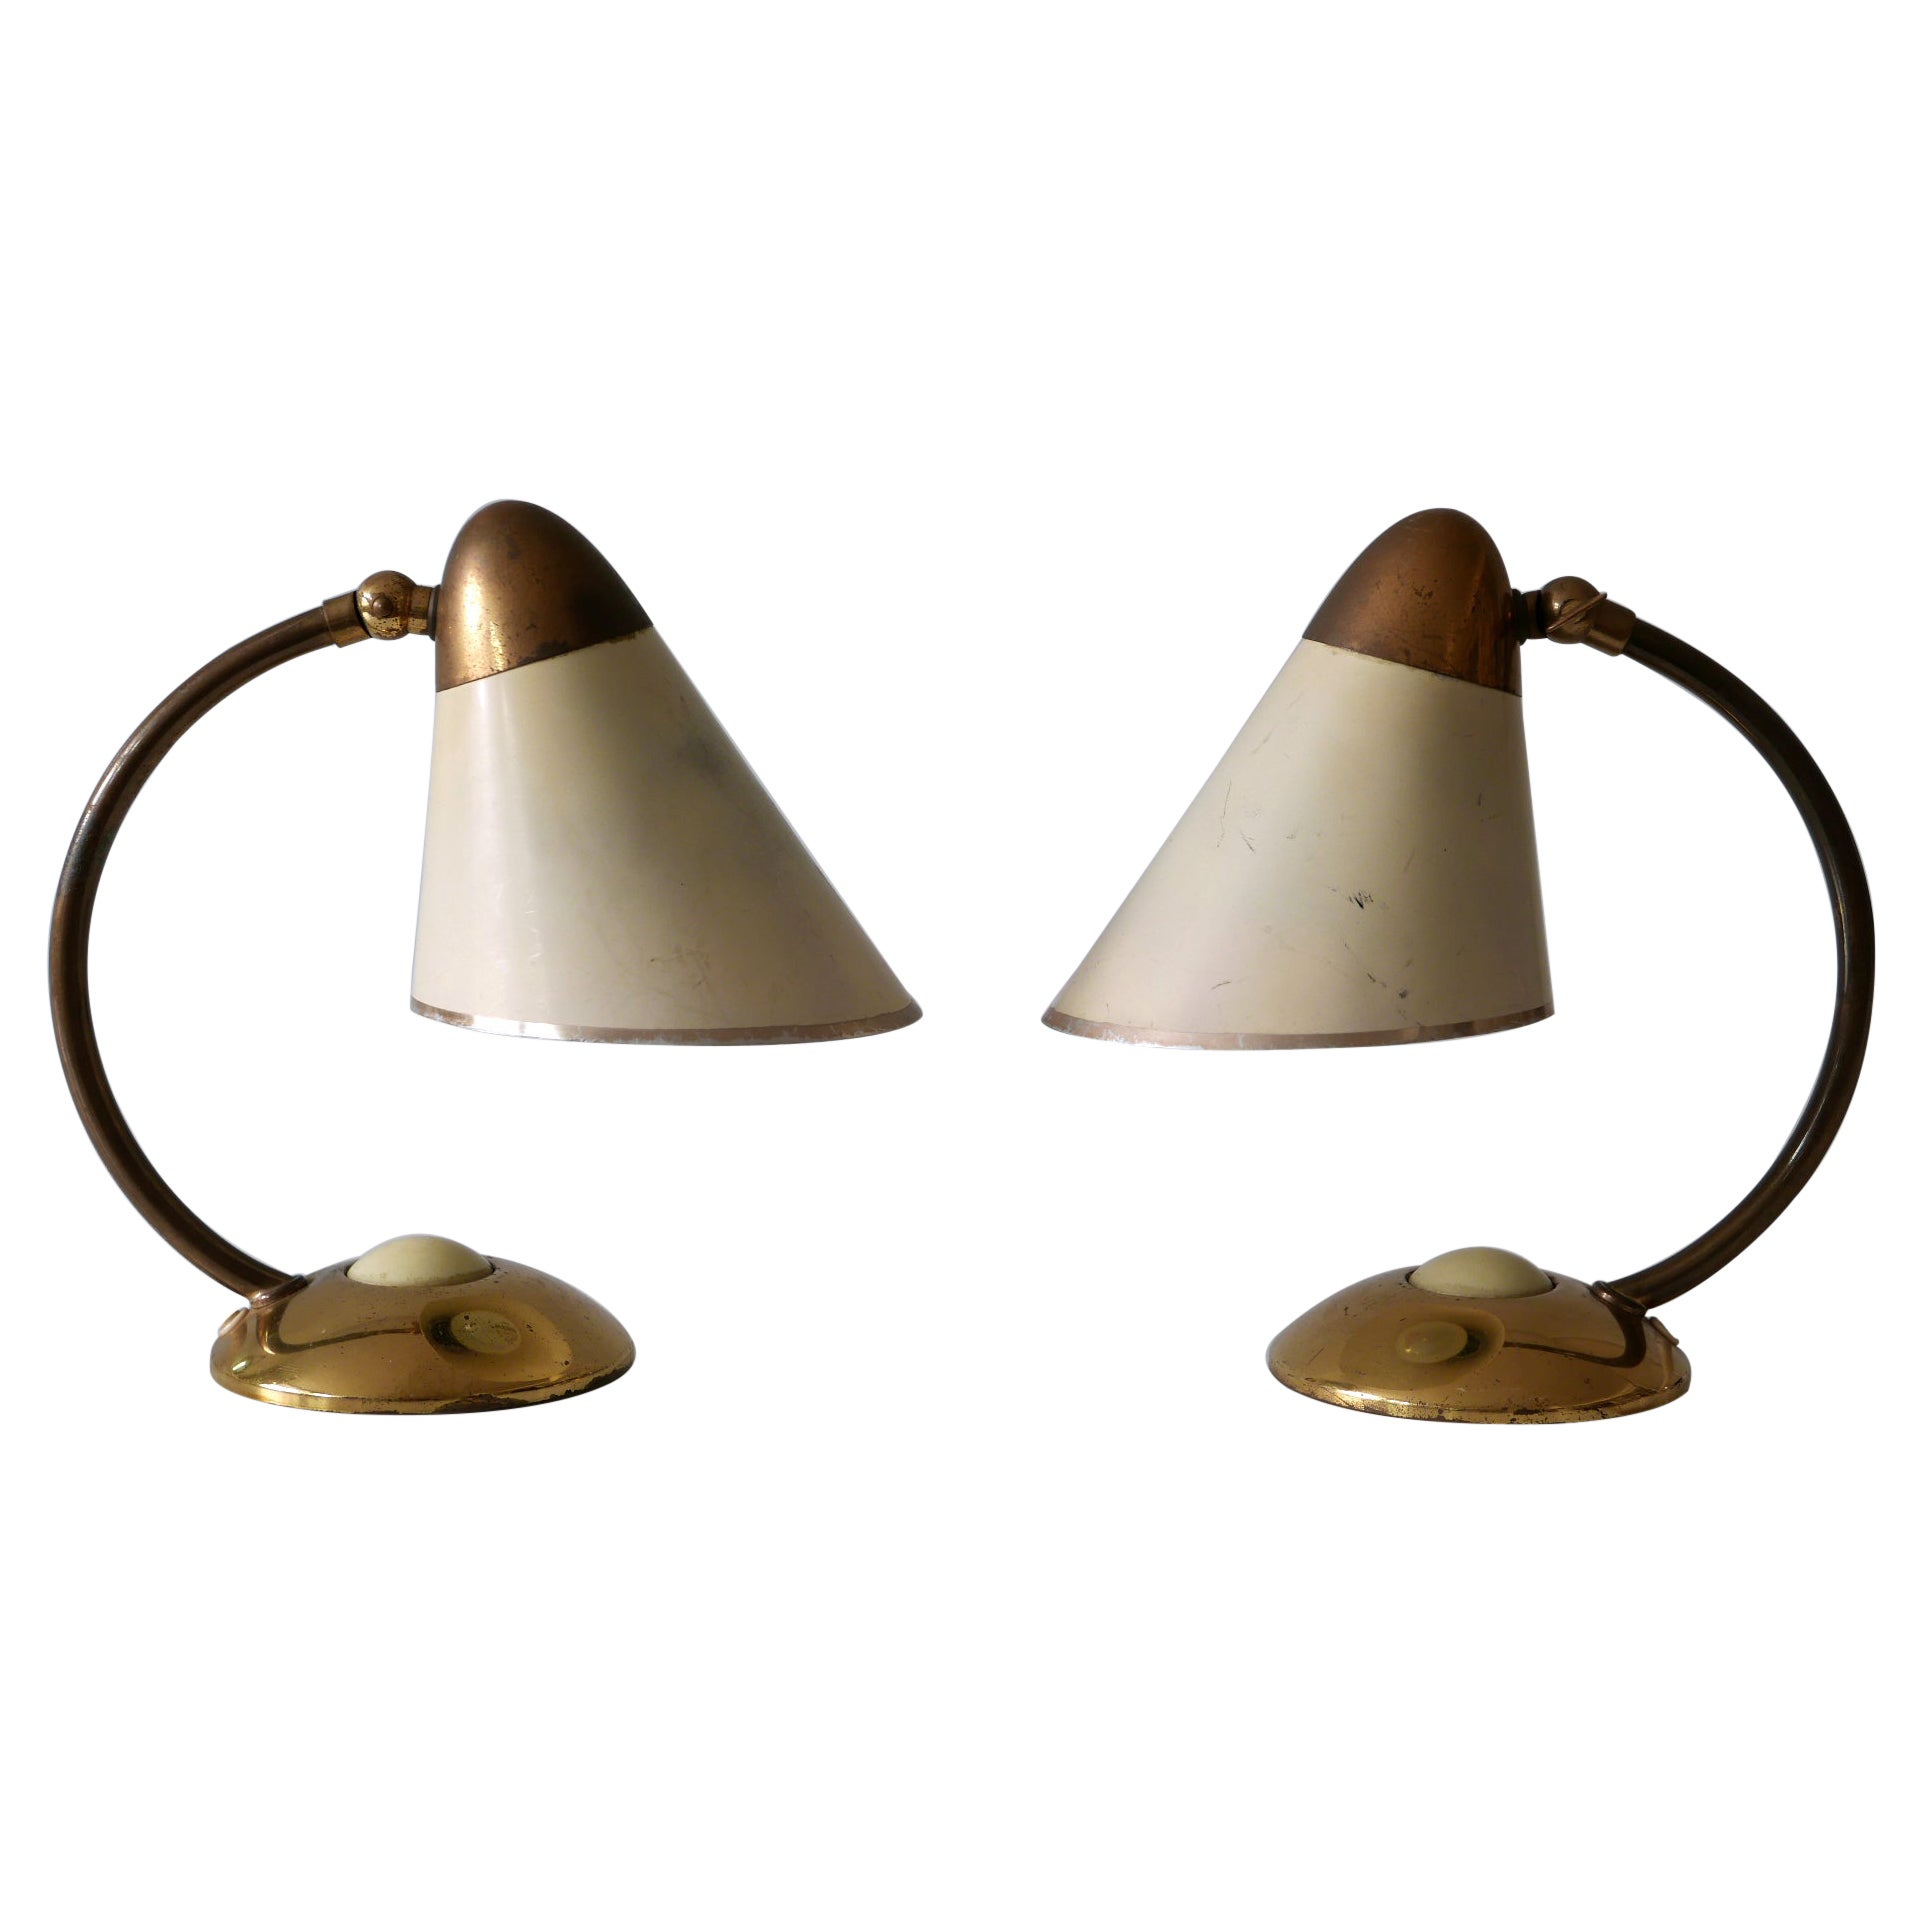 Set of Two Mid-Century Modern Bedside Table Lamps or Wall Lights Germany 1950s